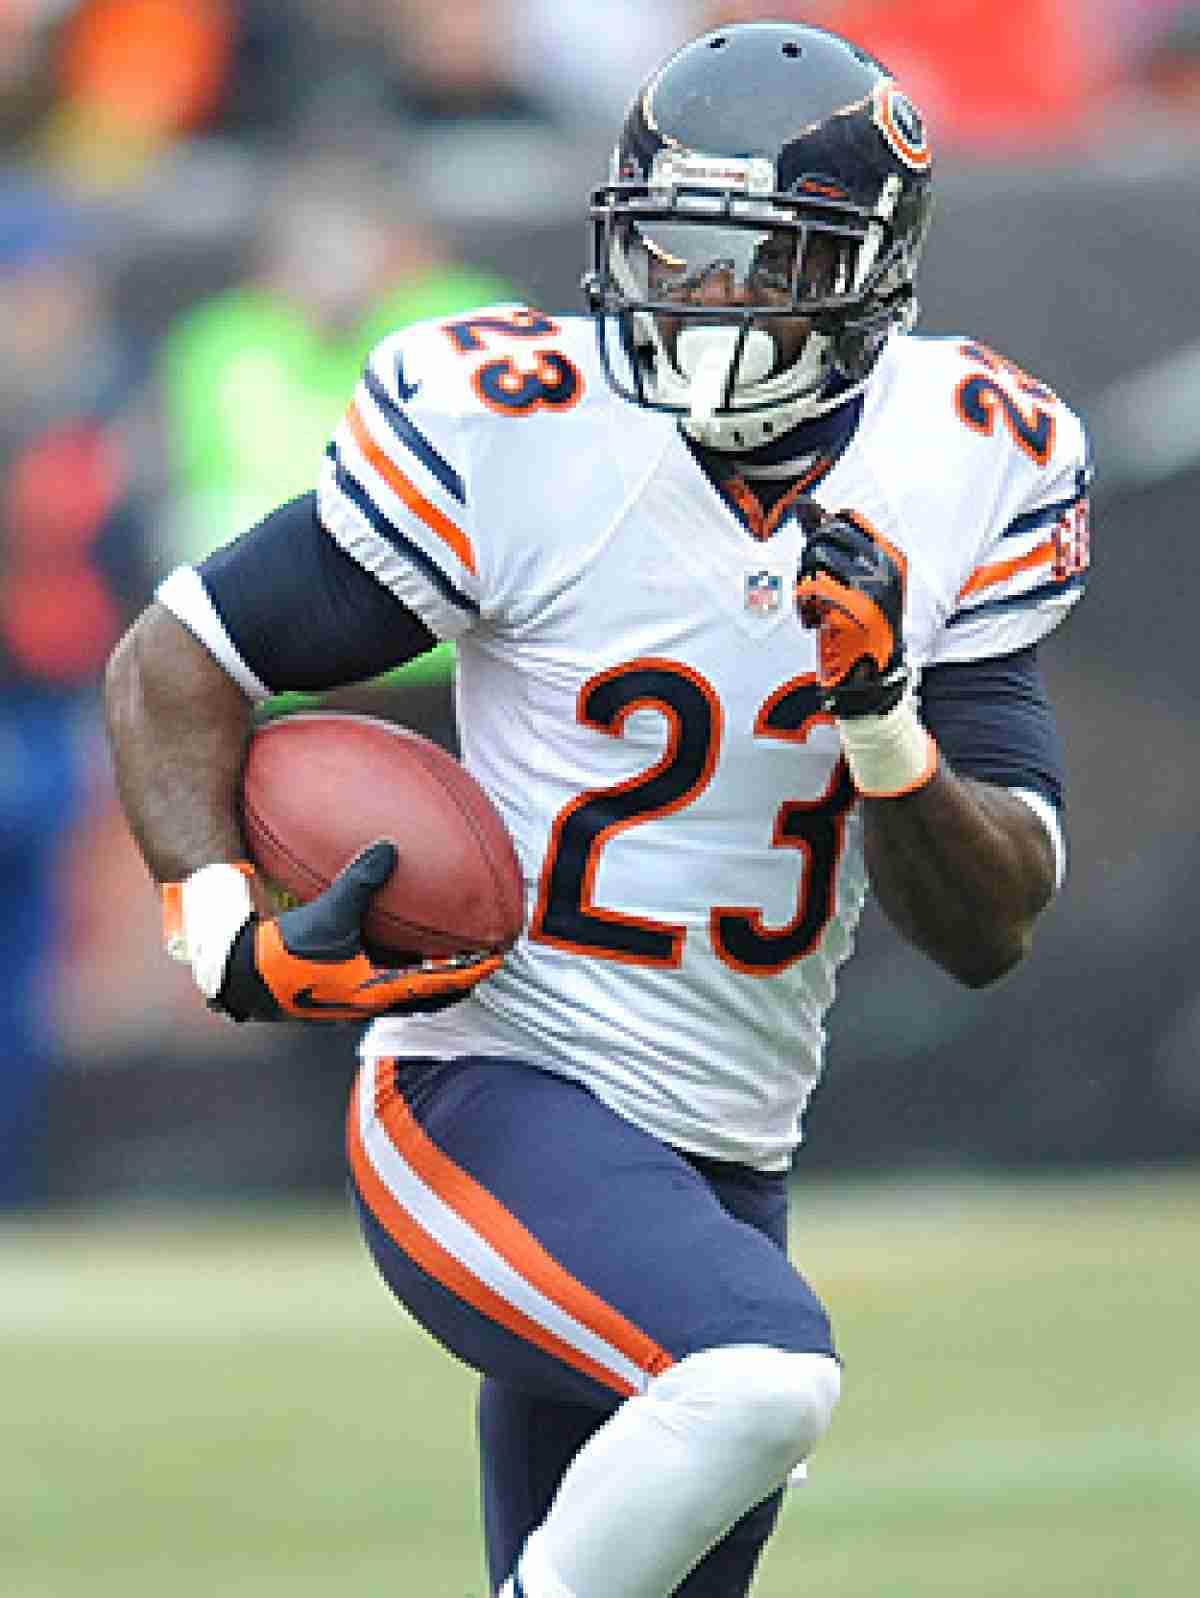 Devin Hester deserves to go to the Hall of Fame in 2022